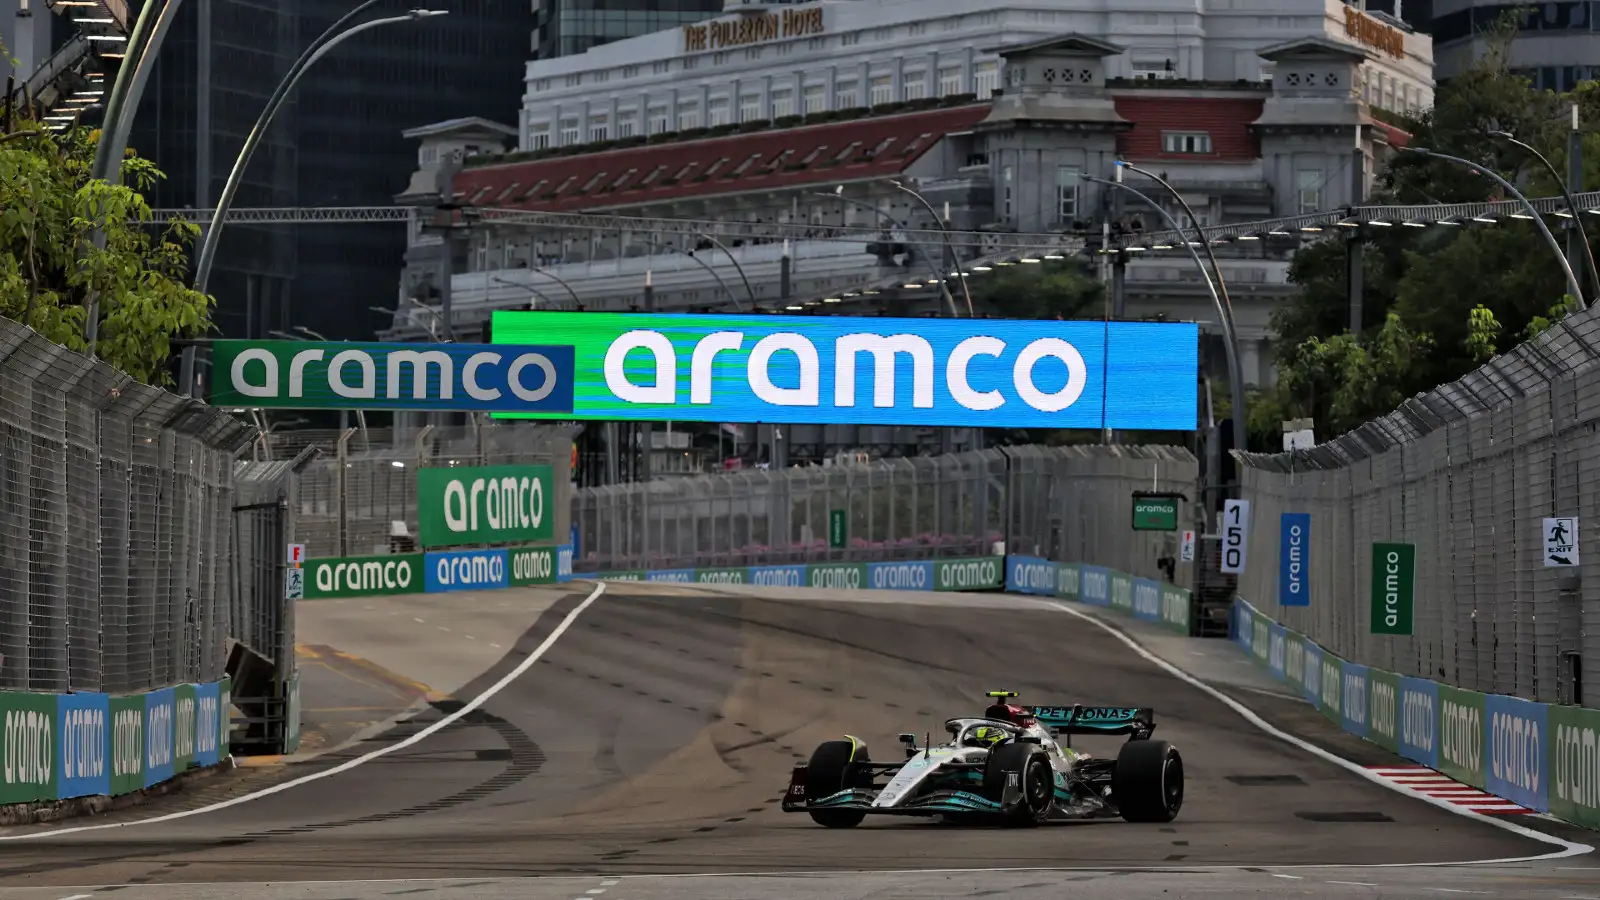 Mercedes' Lewis Hamilton on track during practice for the Singapore Grand Prix. Marina Bay, September 2022.